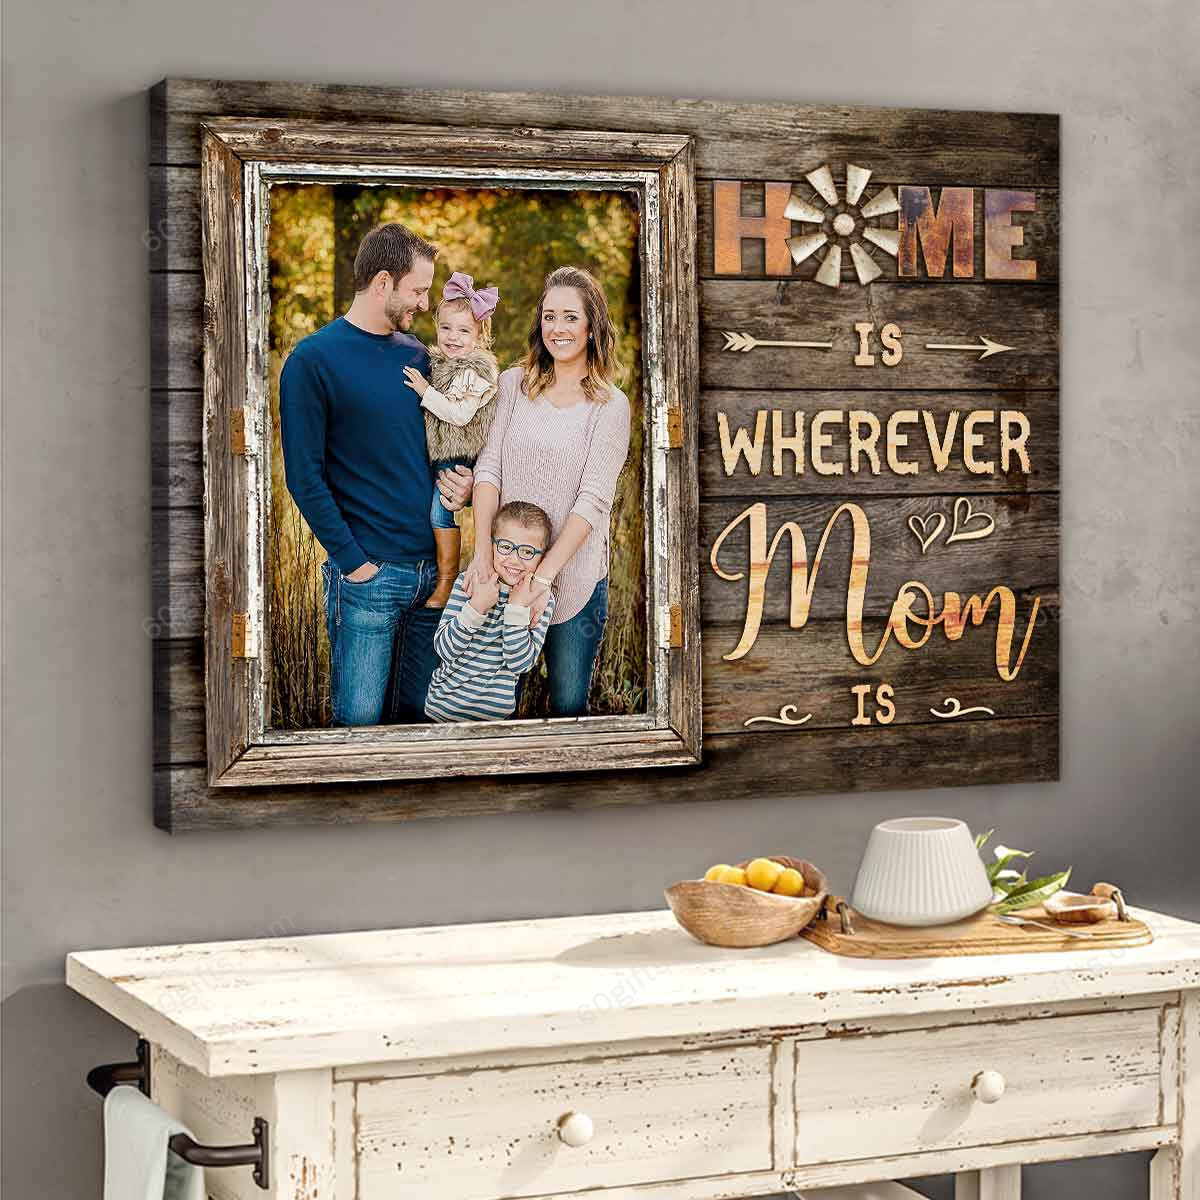 Customized Photo Mother's Day Gift Home Is Wherever Mom Is - Personalized Canvas Print Wall Art Home Decor